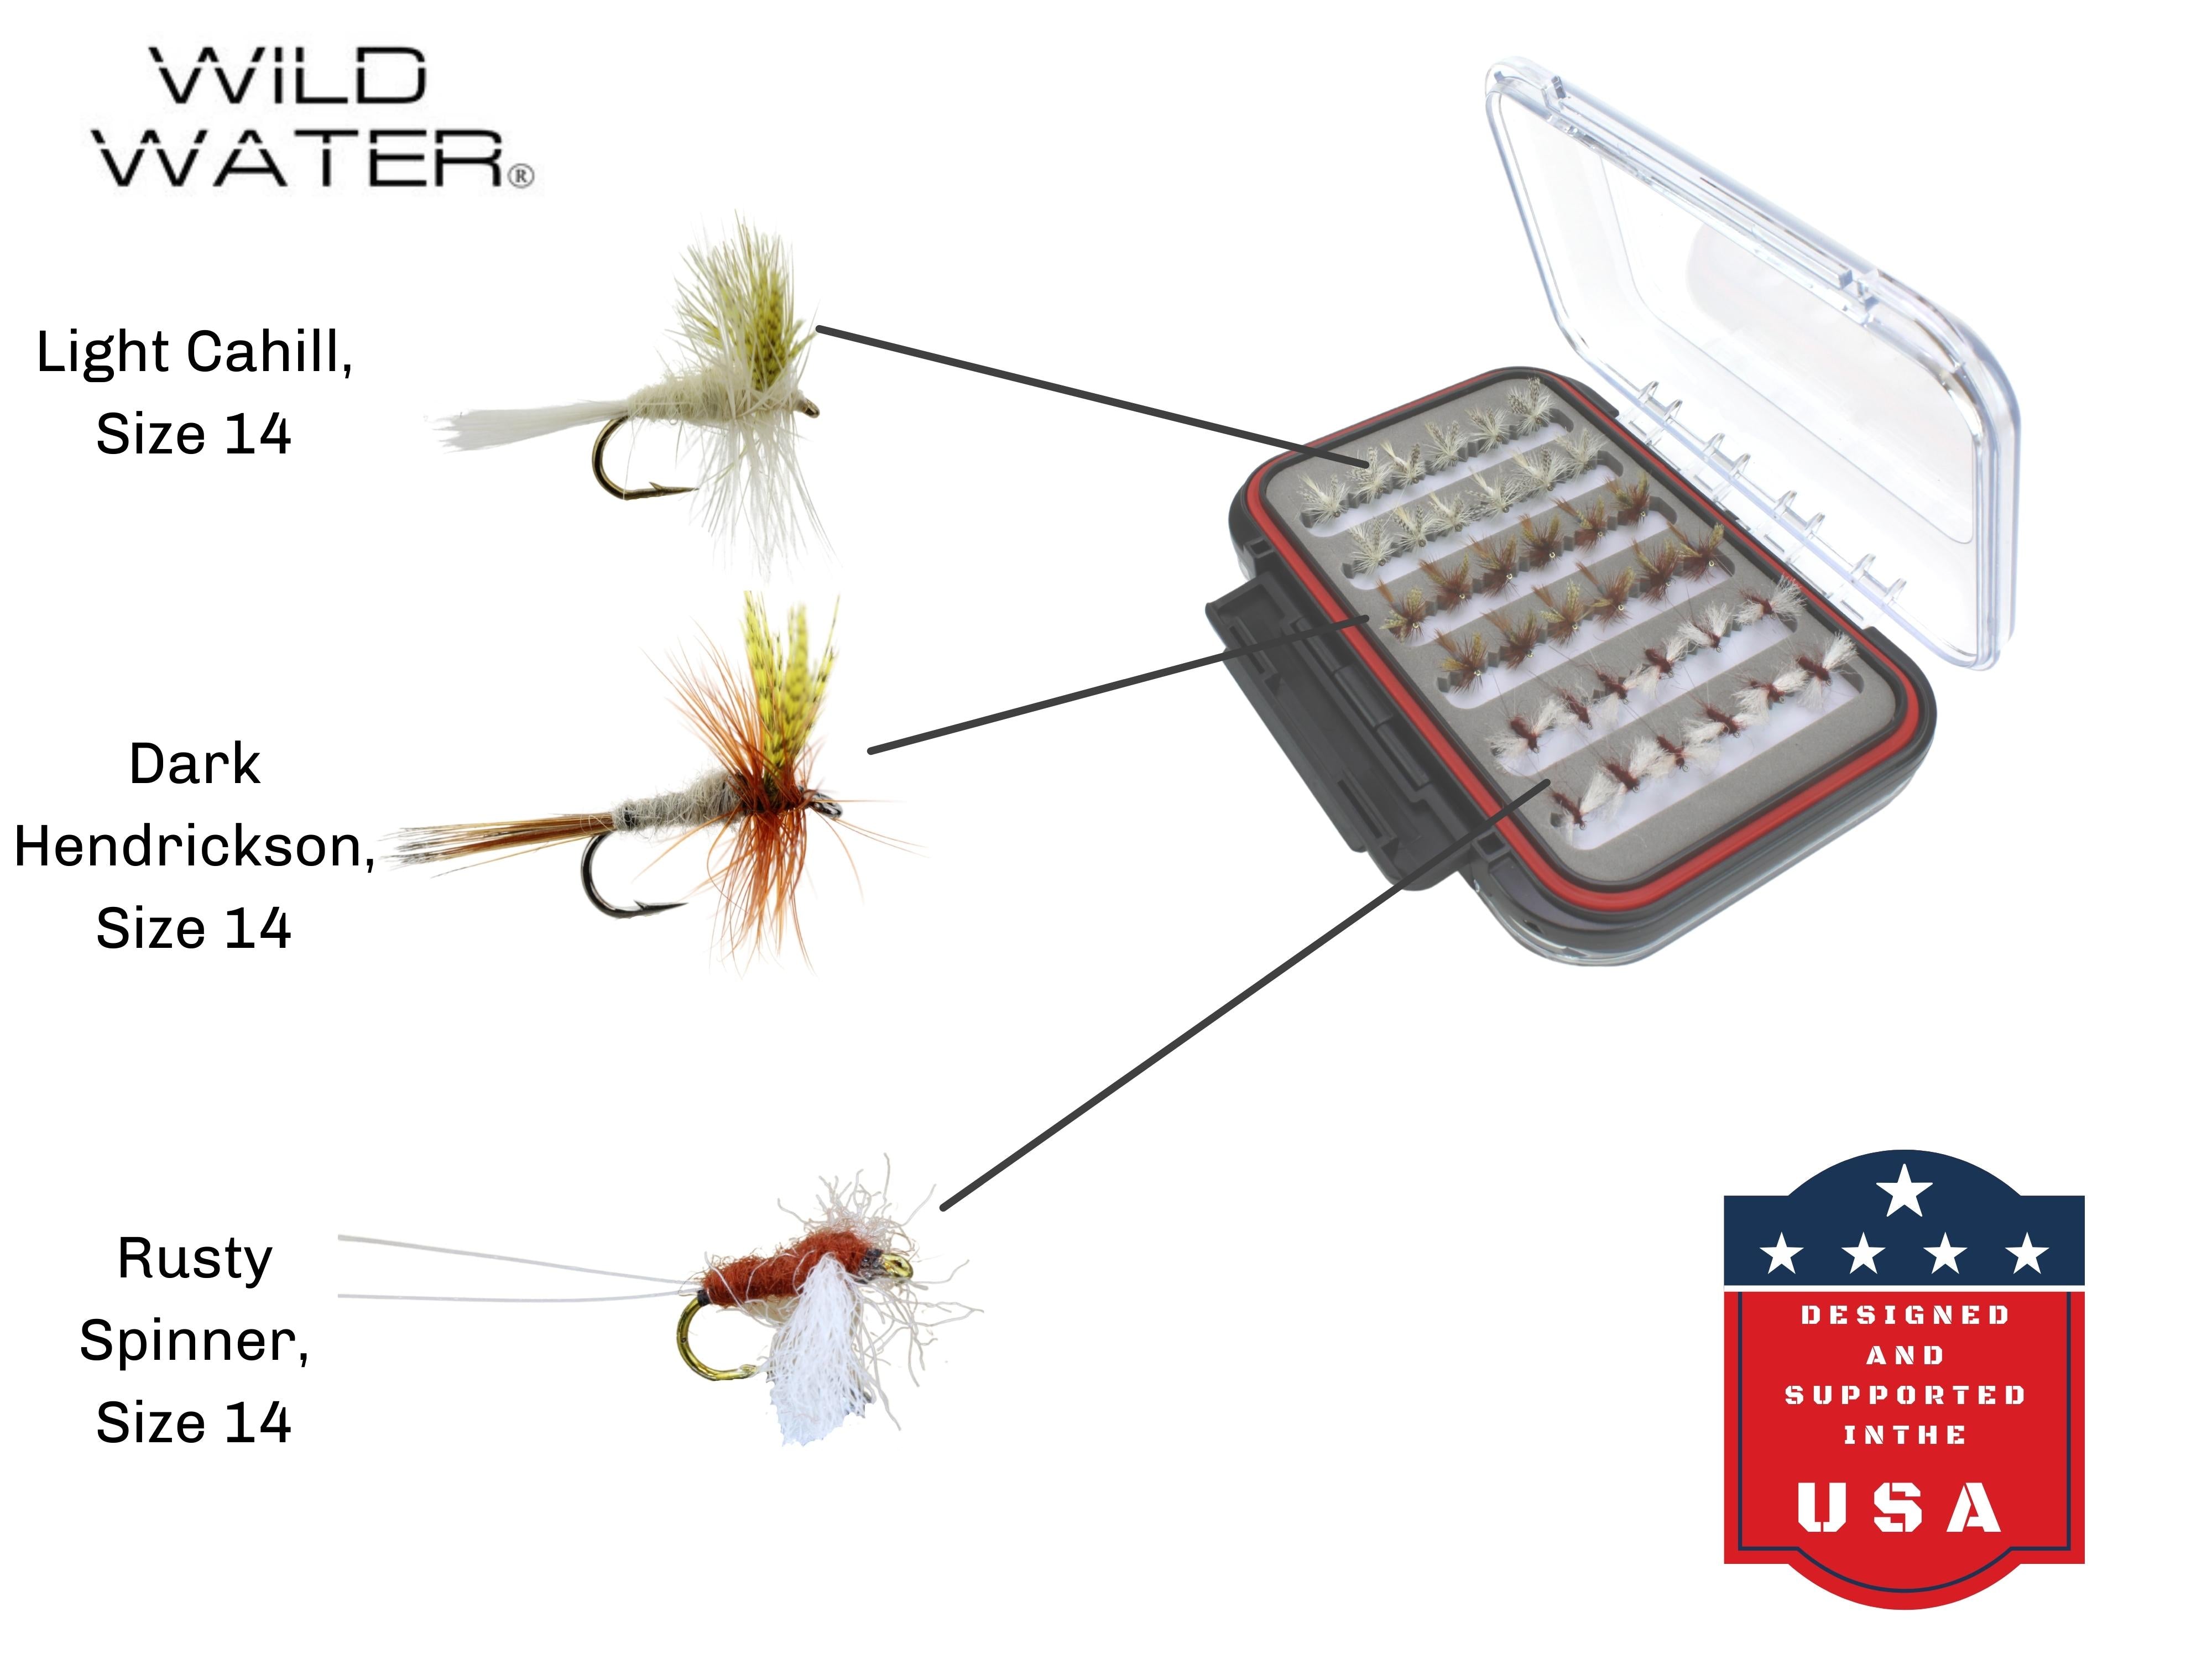 Wild Water Dry Fly Assortment, 72 Flies with Large Fly Box